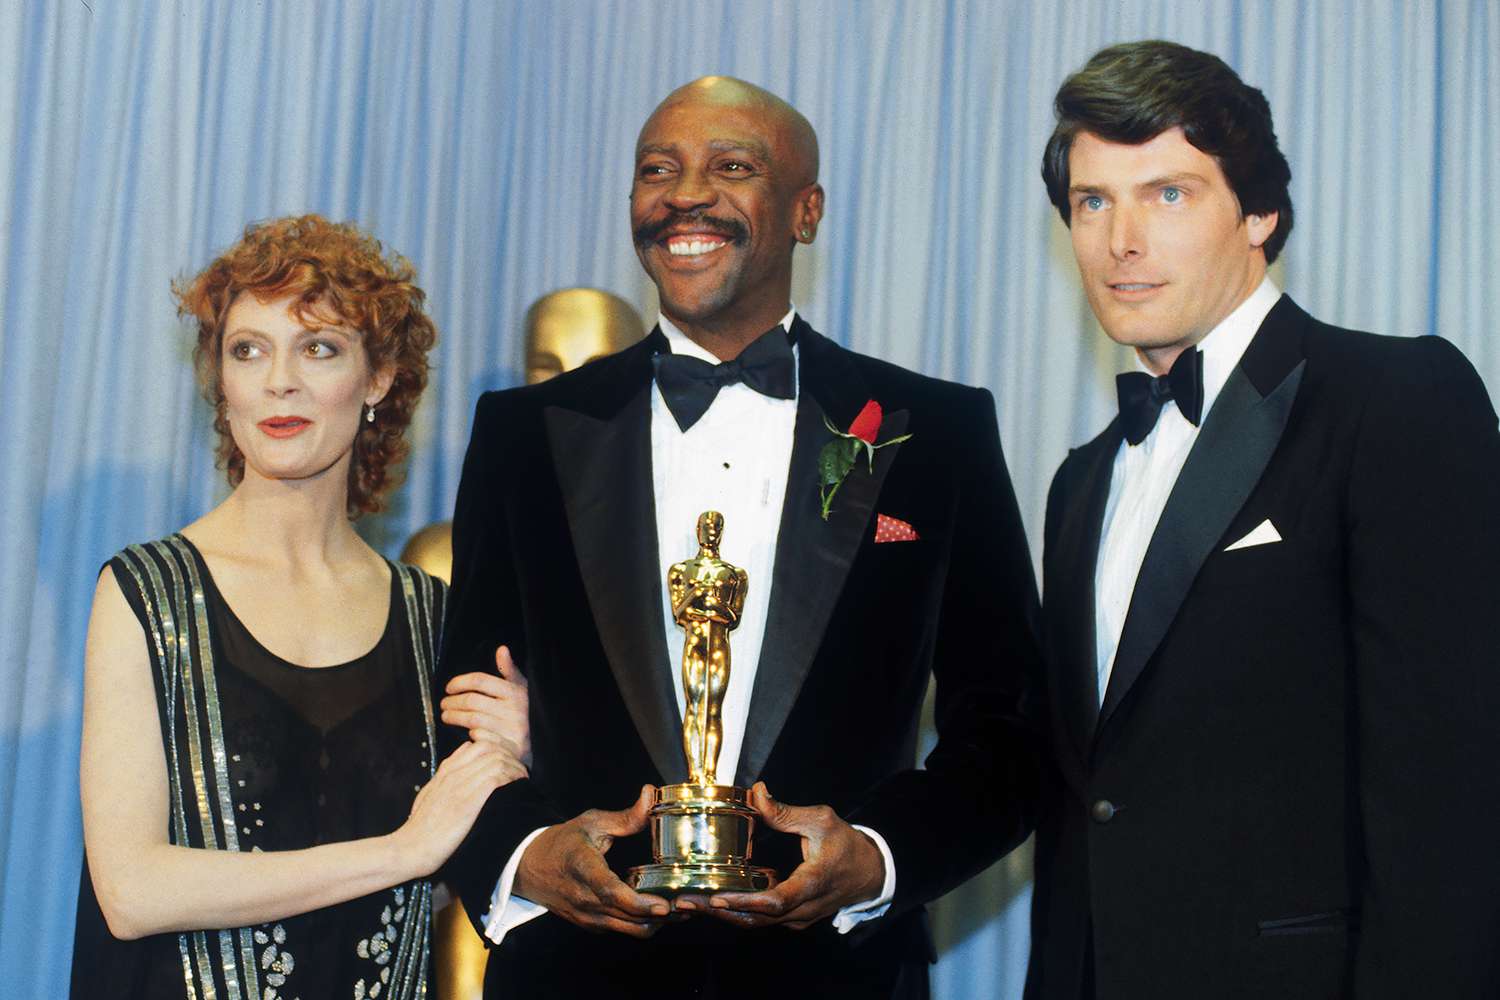 Actress Susan Sarandon (left) and Actor Christopher Reeves flank either side of Louis Gossett Jr., winner of the 1982 Academy Award for Best Supporting Actor for his role in An Officer and a Gentleman backstage during the Academy Awards Ceremony.